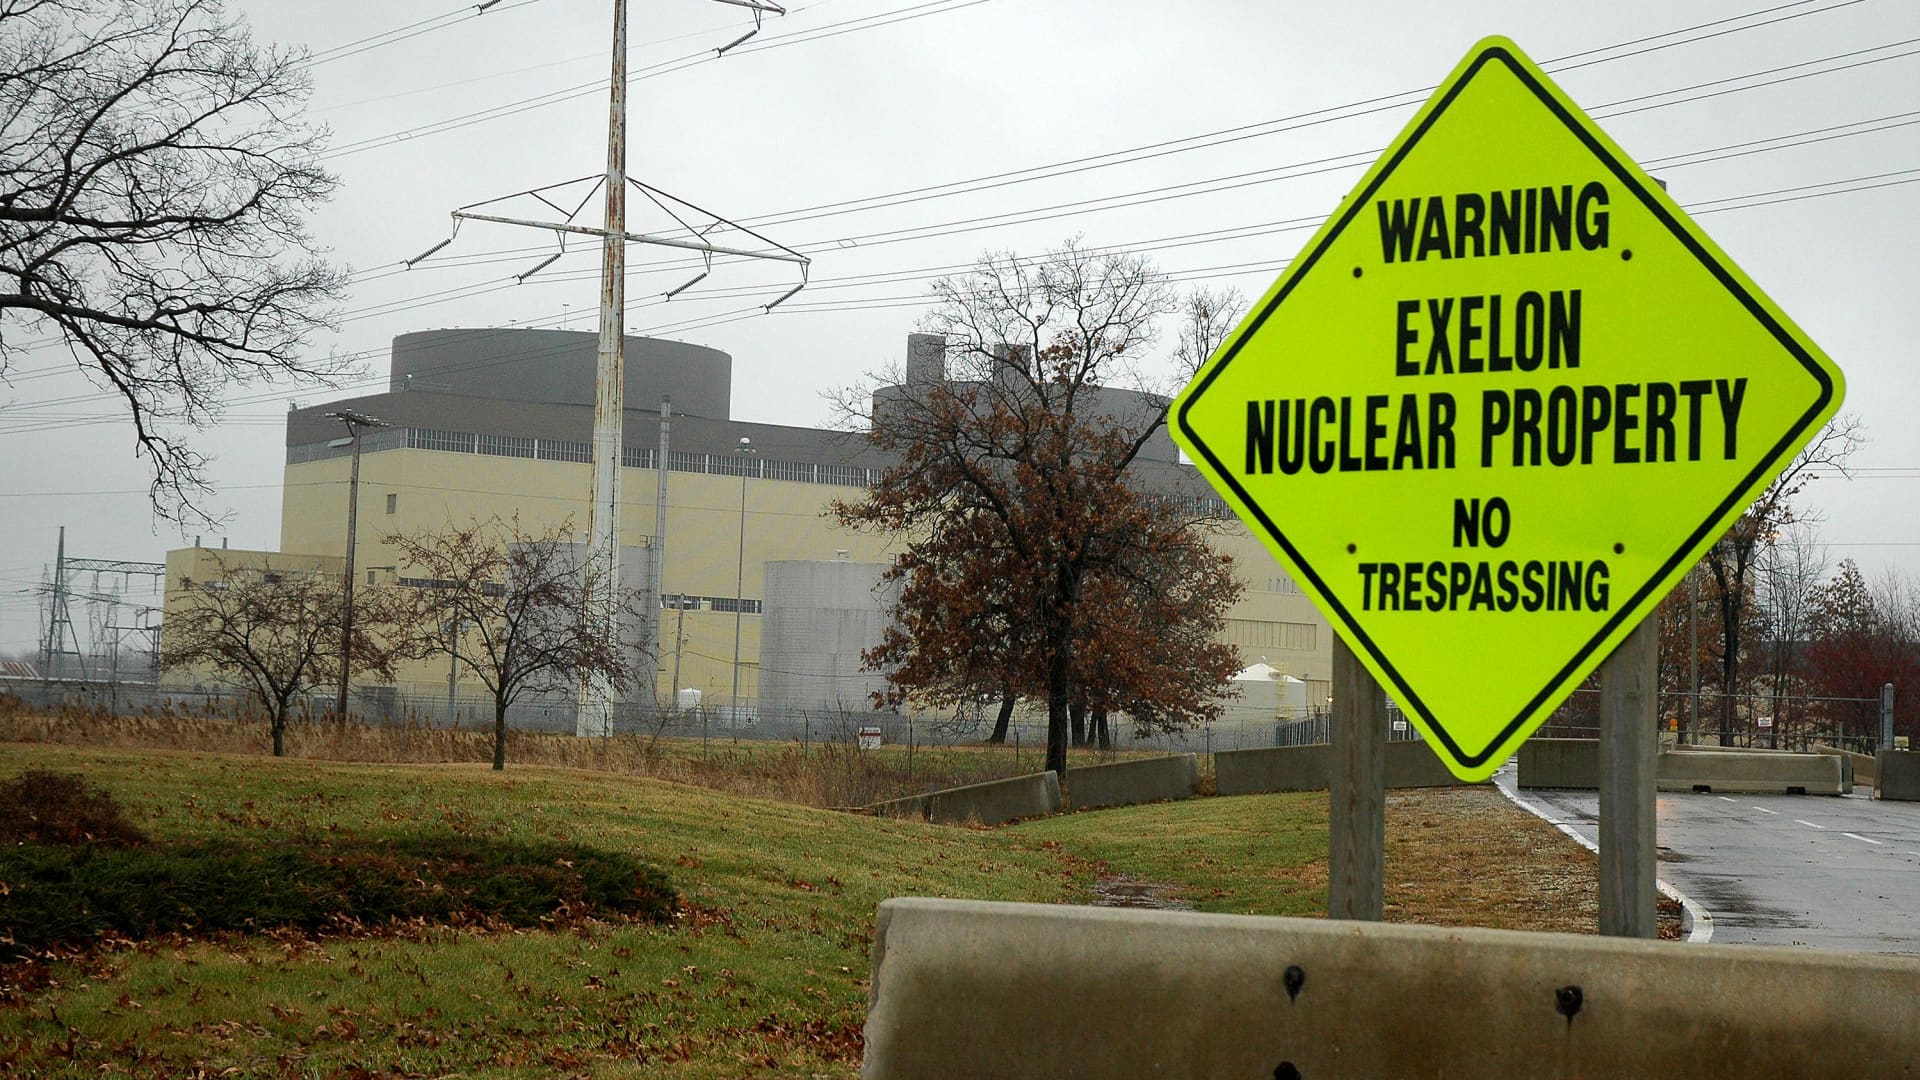 UNITED STATES - DECEMBER 12:A sign marks the entrance to the Exelon Corp. Braidwood Nuclear Generating Station in Braidwood, Illinois, Tuesday, December 12, 2006. Exelon Corp., the largest U.S. owner of nuclear-fueled power plants, raised its dividend for the first time since 2004 and forecast an increase in 2007 profit as its generation unit sells power at higher prices.(Photo by Joe Tabacca/Bloomberg via Getty Images)